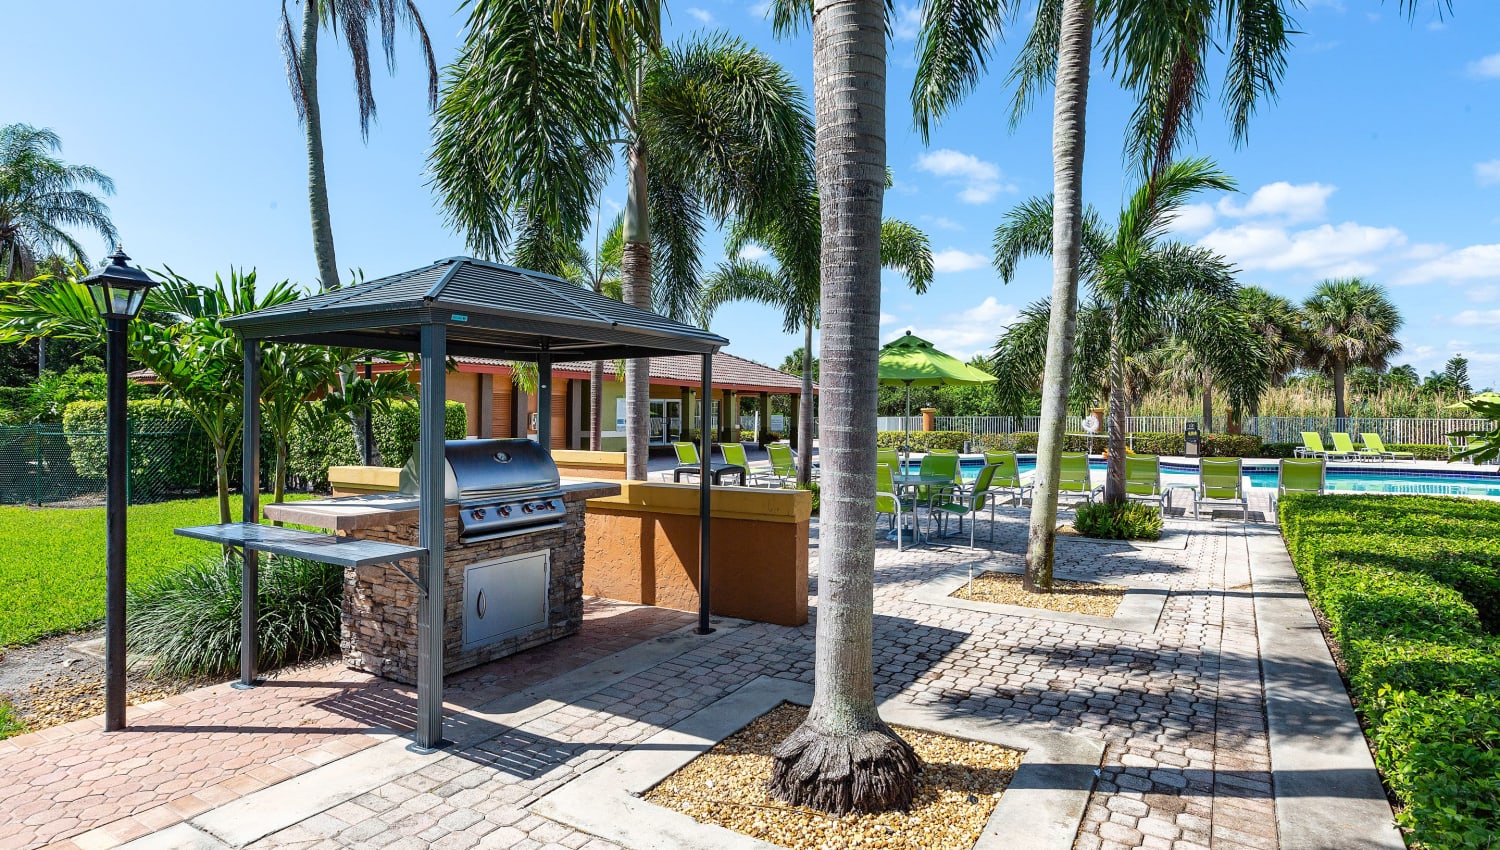 Pool and BBQ area at Whalers Cove Apartments in Boynton Beach, Florida